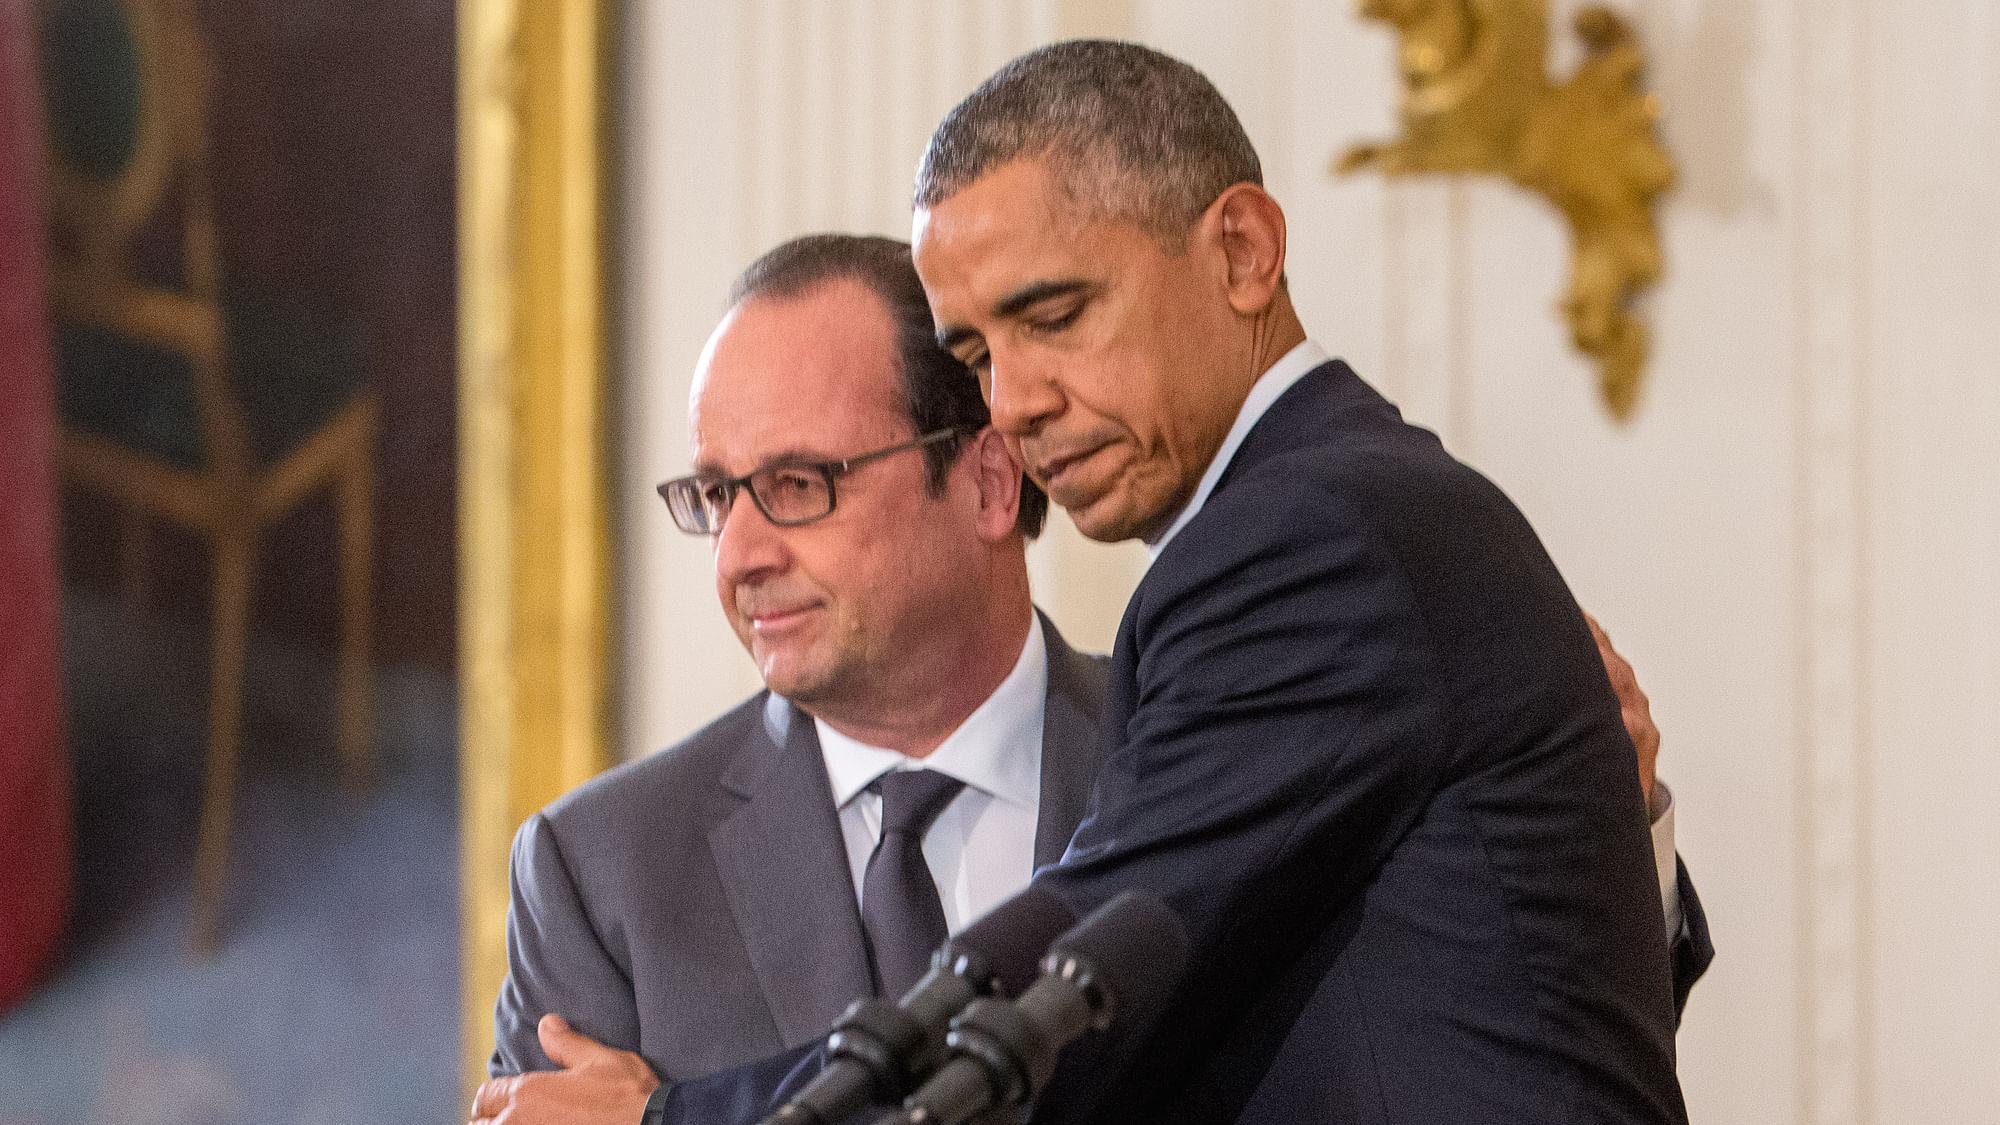 President Barack Obama and French President Francois Hollande embrace during a joint news conference in the East Room of the White House in Washington. (Photo: AP)